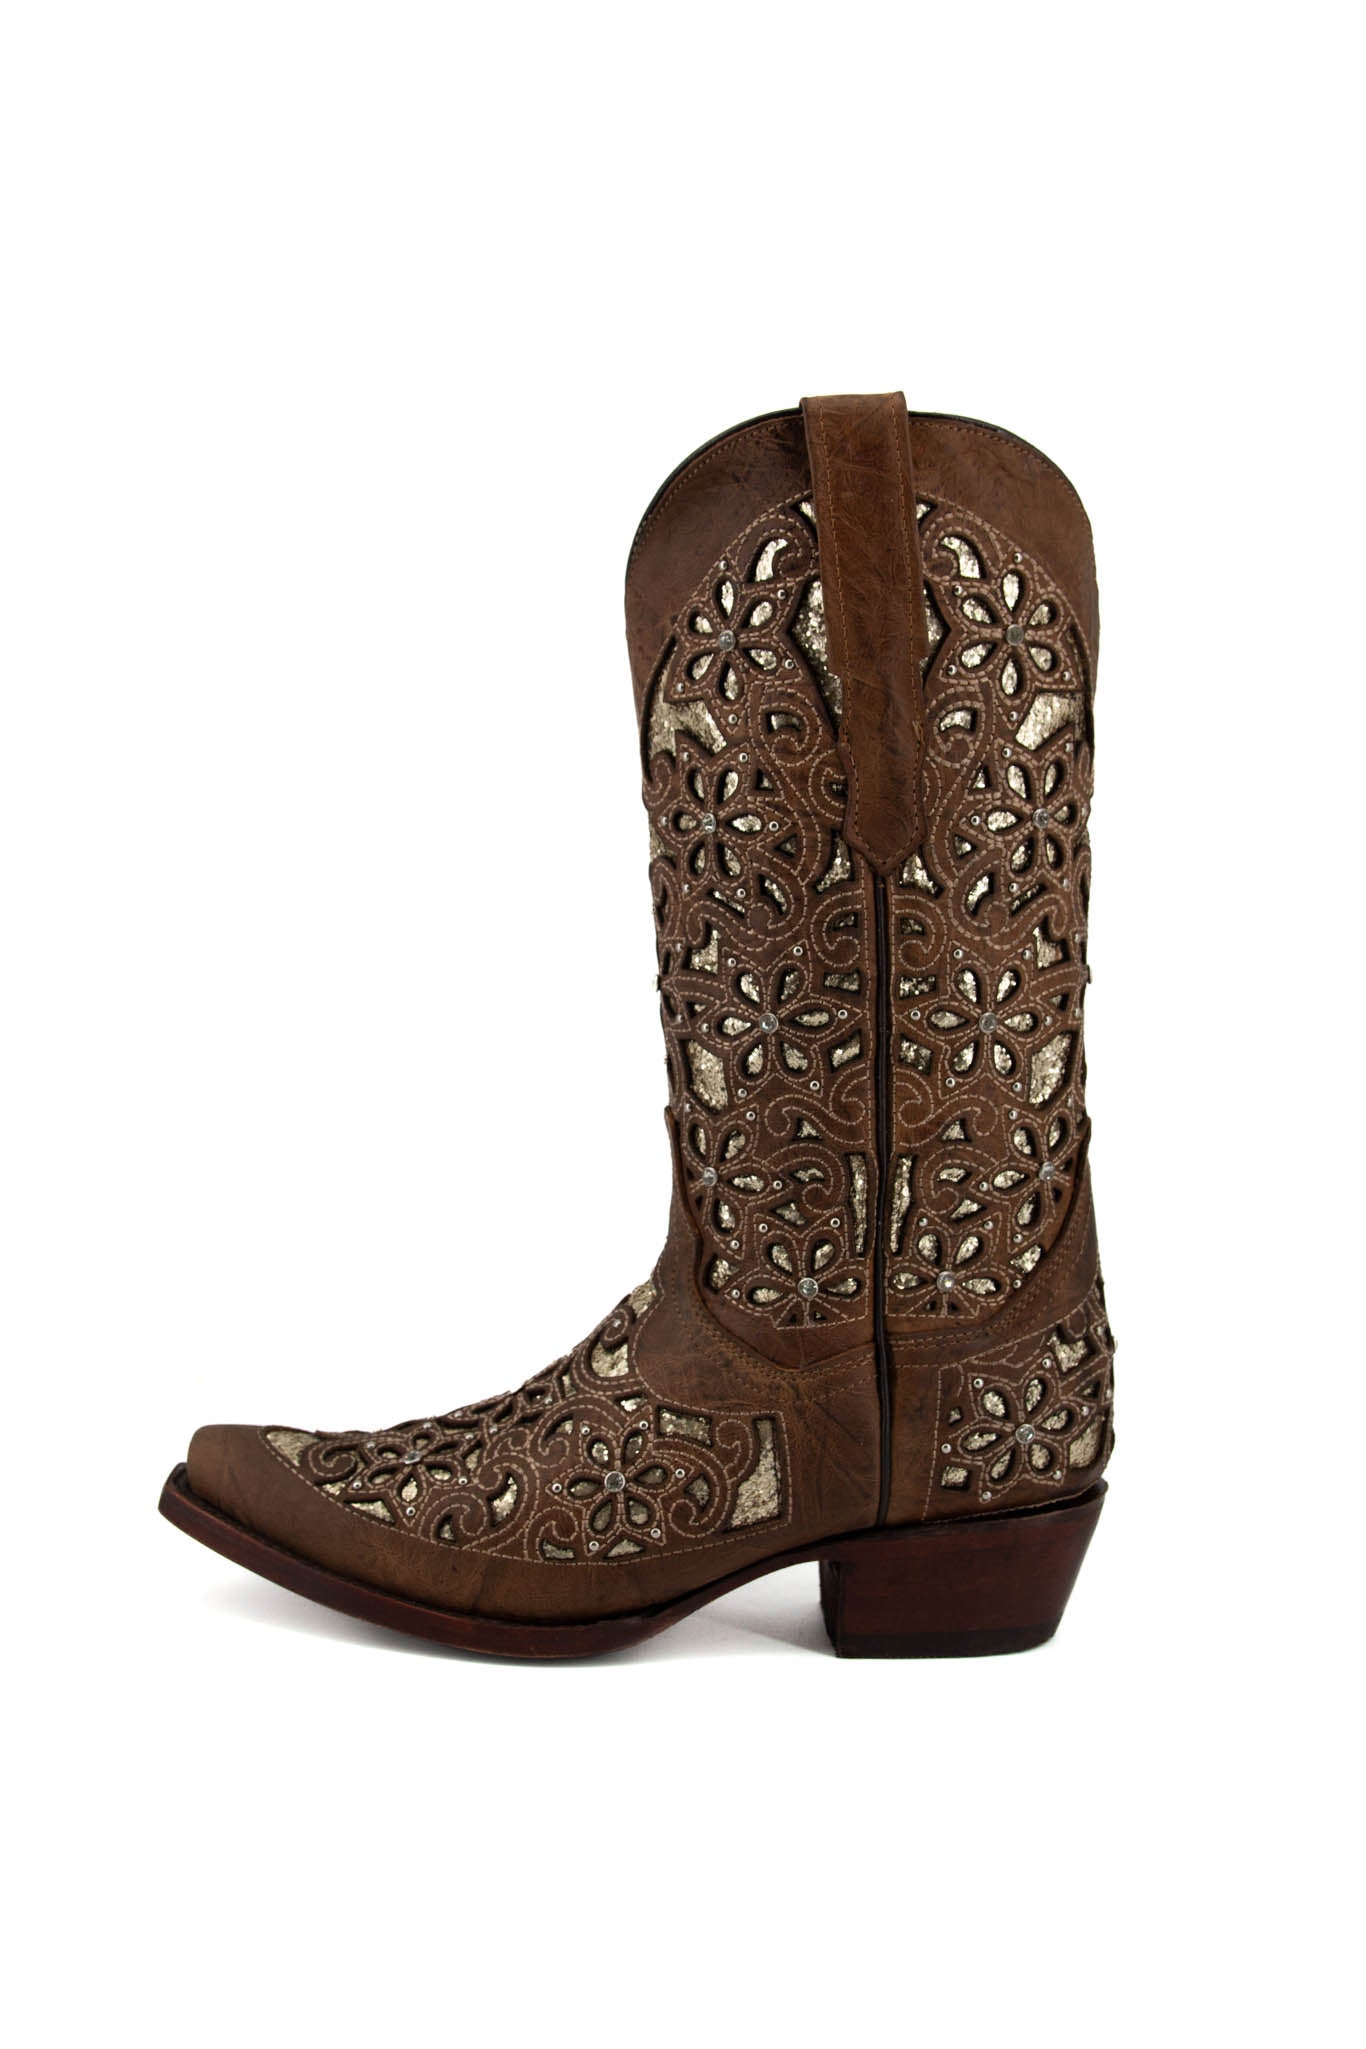 The Dunas Snip Toe Cowgirl Boot